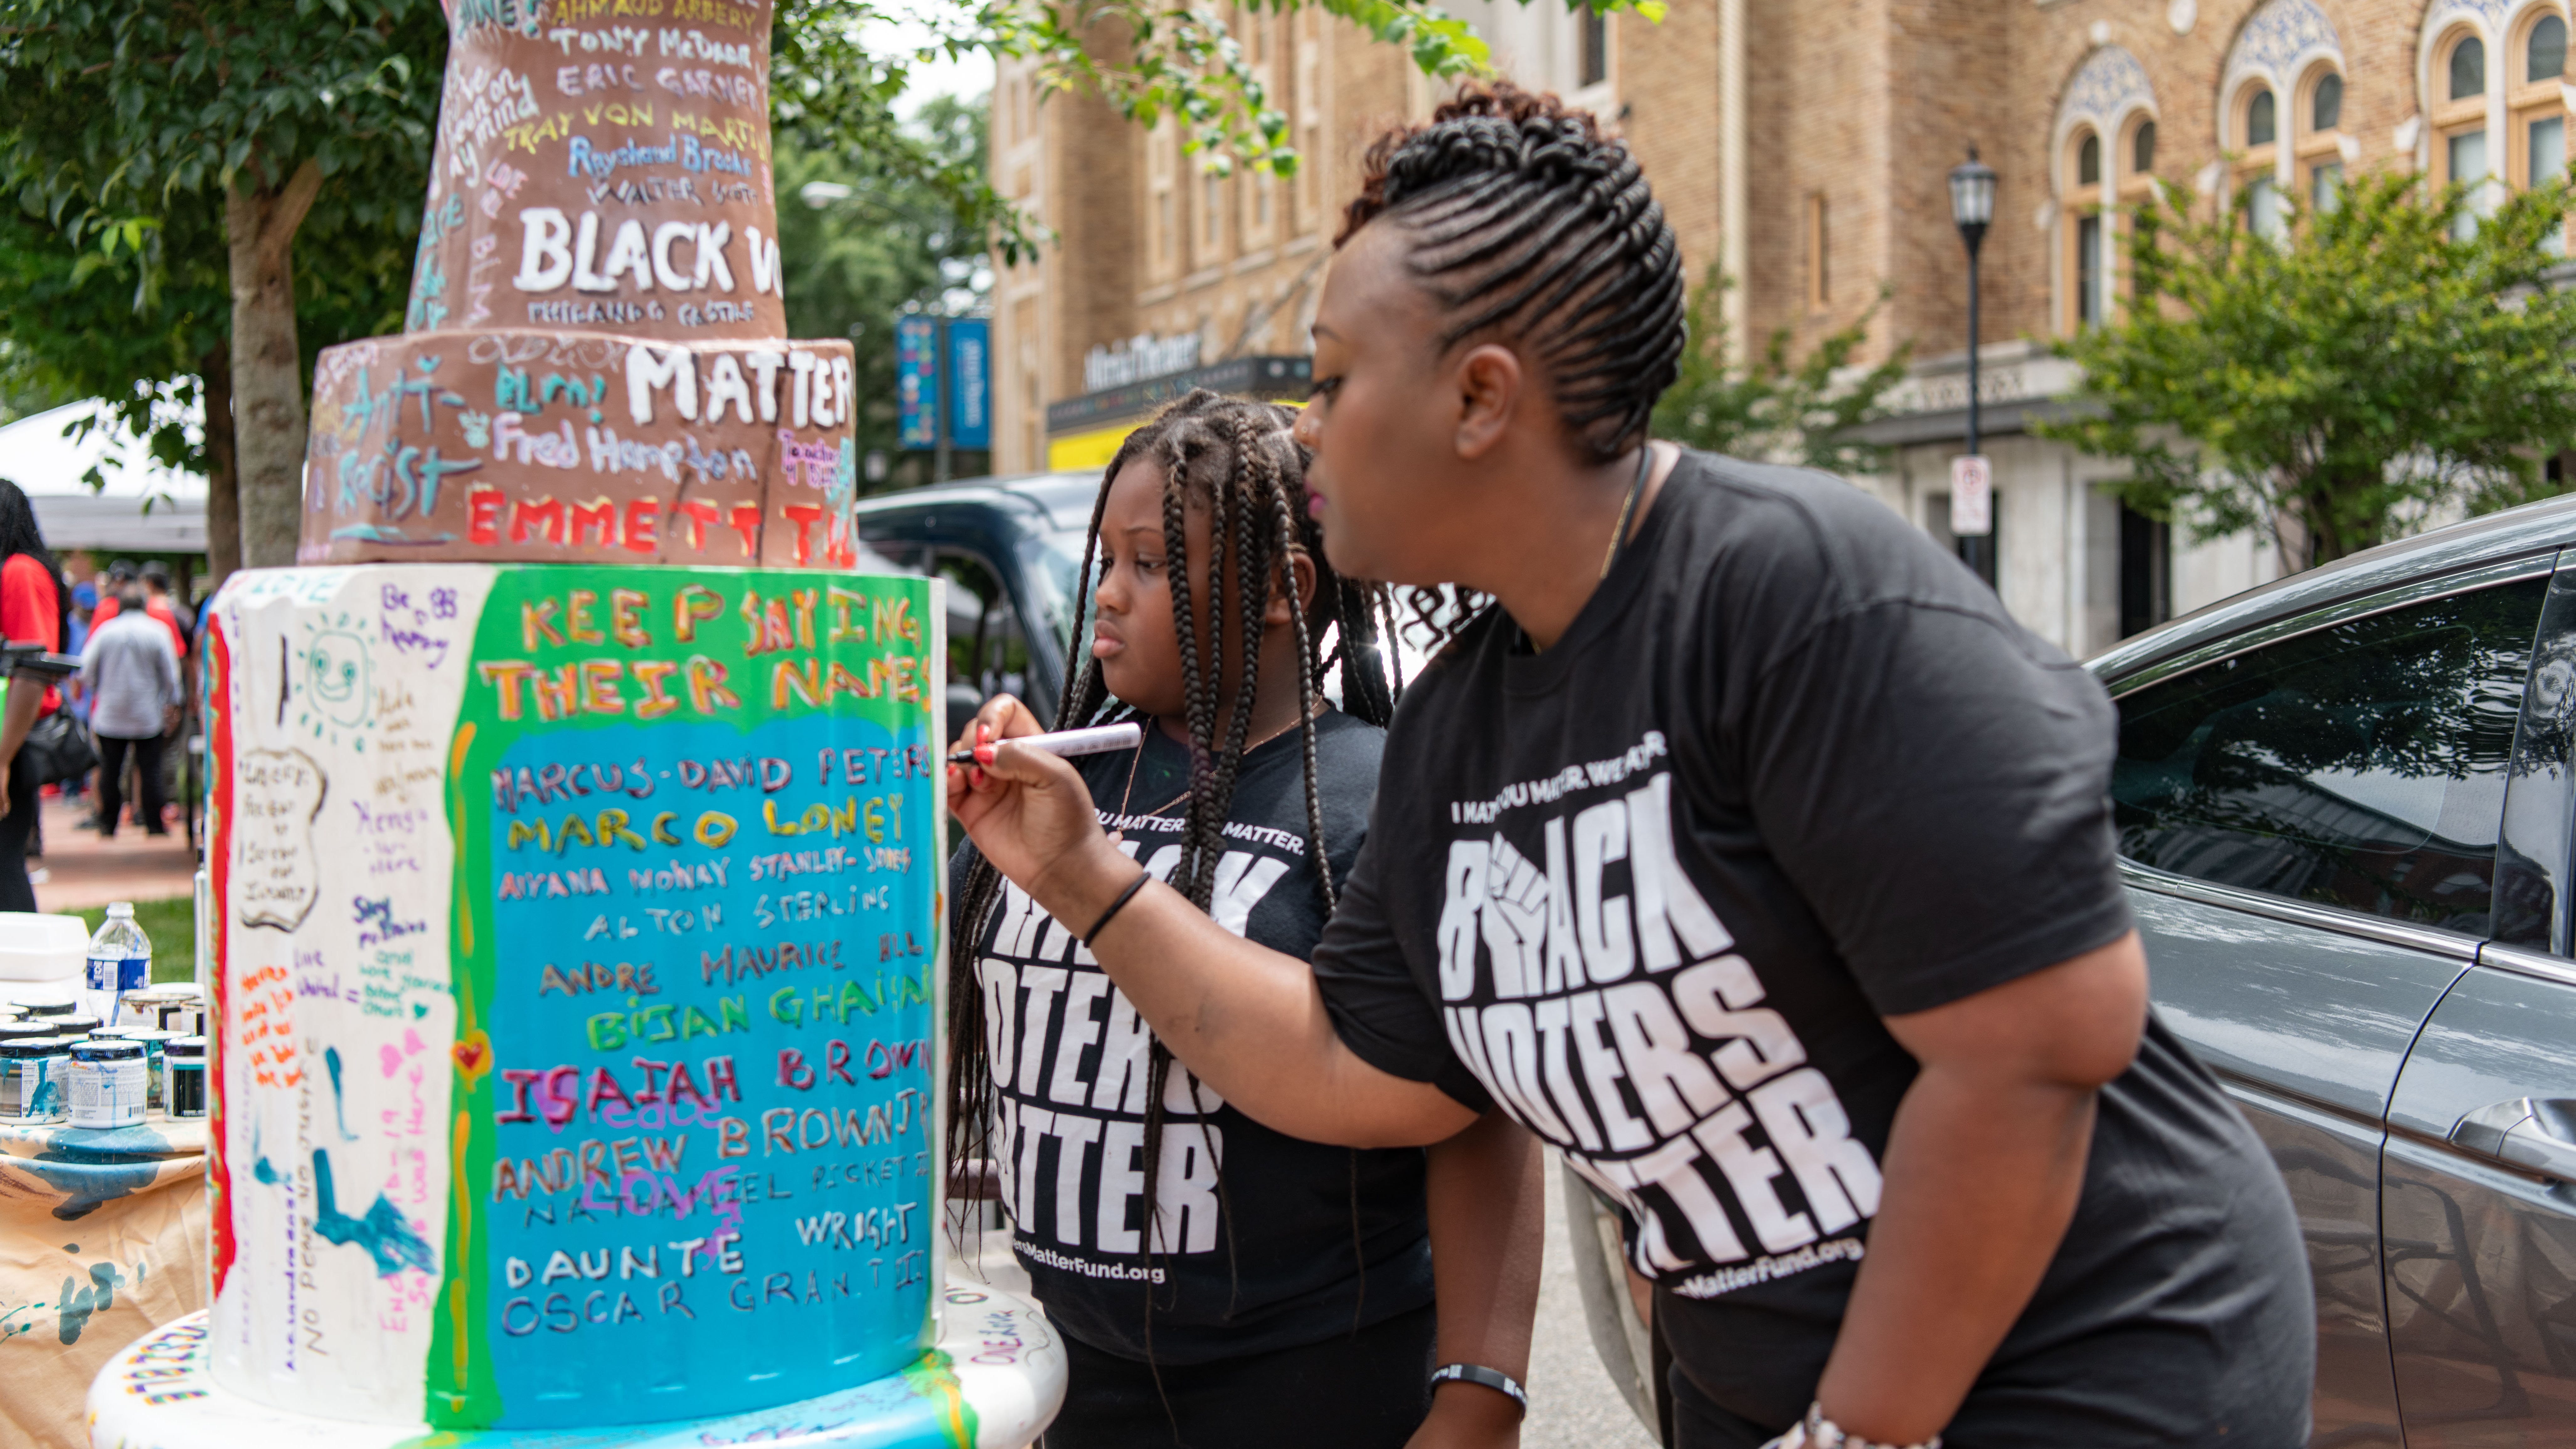 Ysrael Binns, 8, and mother Shenita of Atlanta, Georgia, add to an art installation at an event hosted by voting rights group Black Voters Matter commemorating the 60th anniversary of the Freedom Rides, and the eighth anniversary of the Shelby County v. Holder Supreme Court decision in Richmond, VA on June 25, 2021.